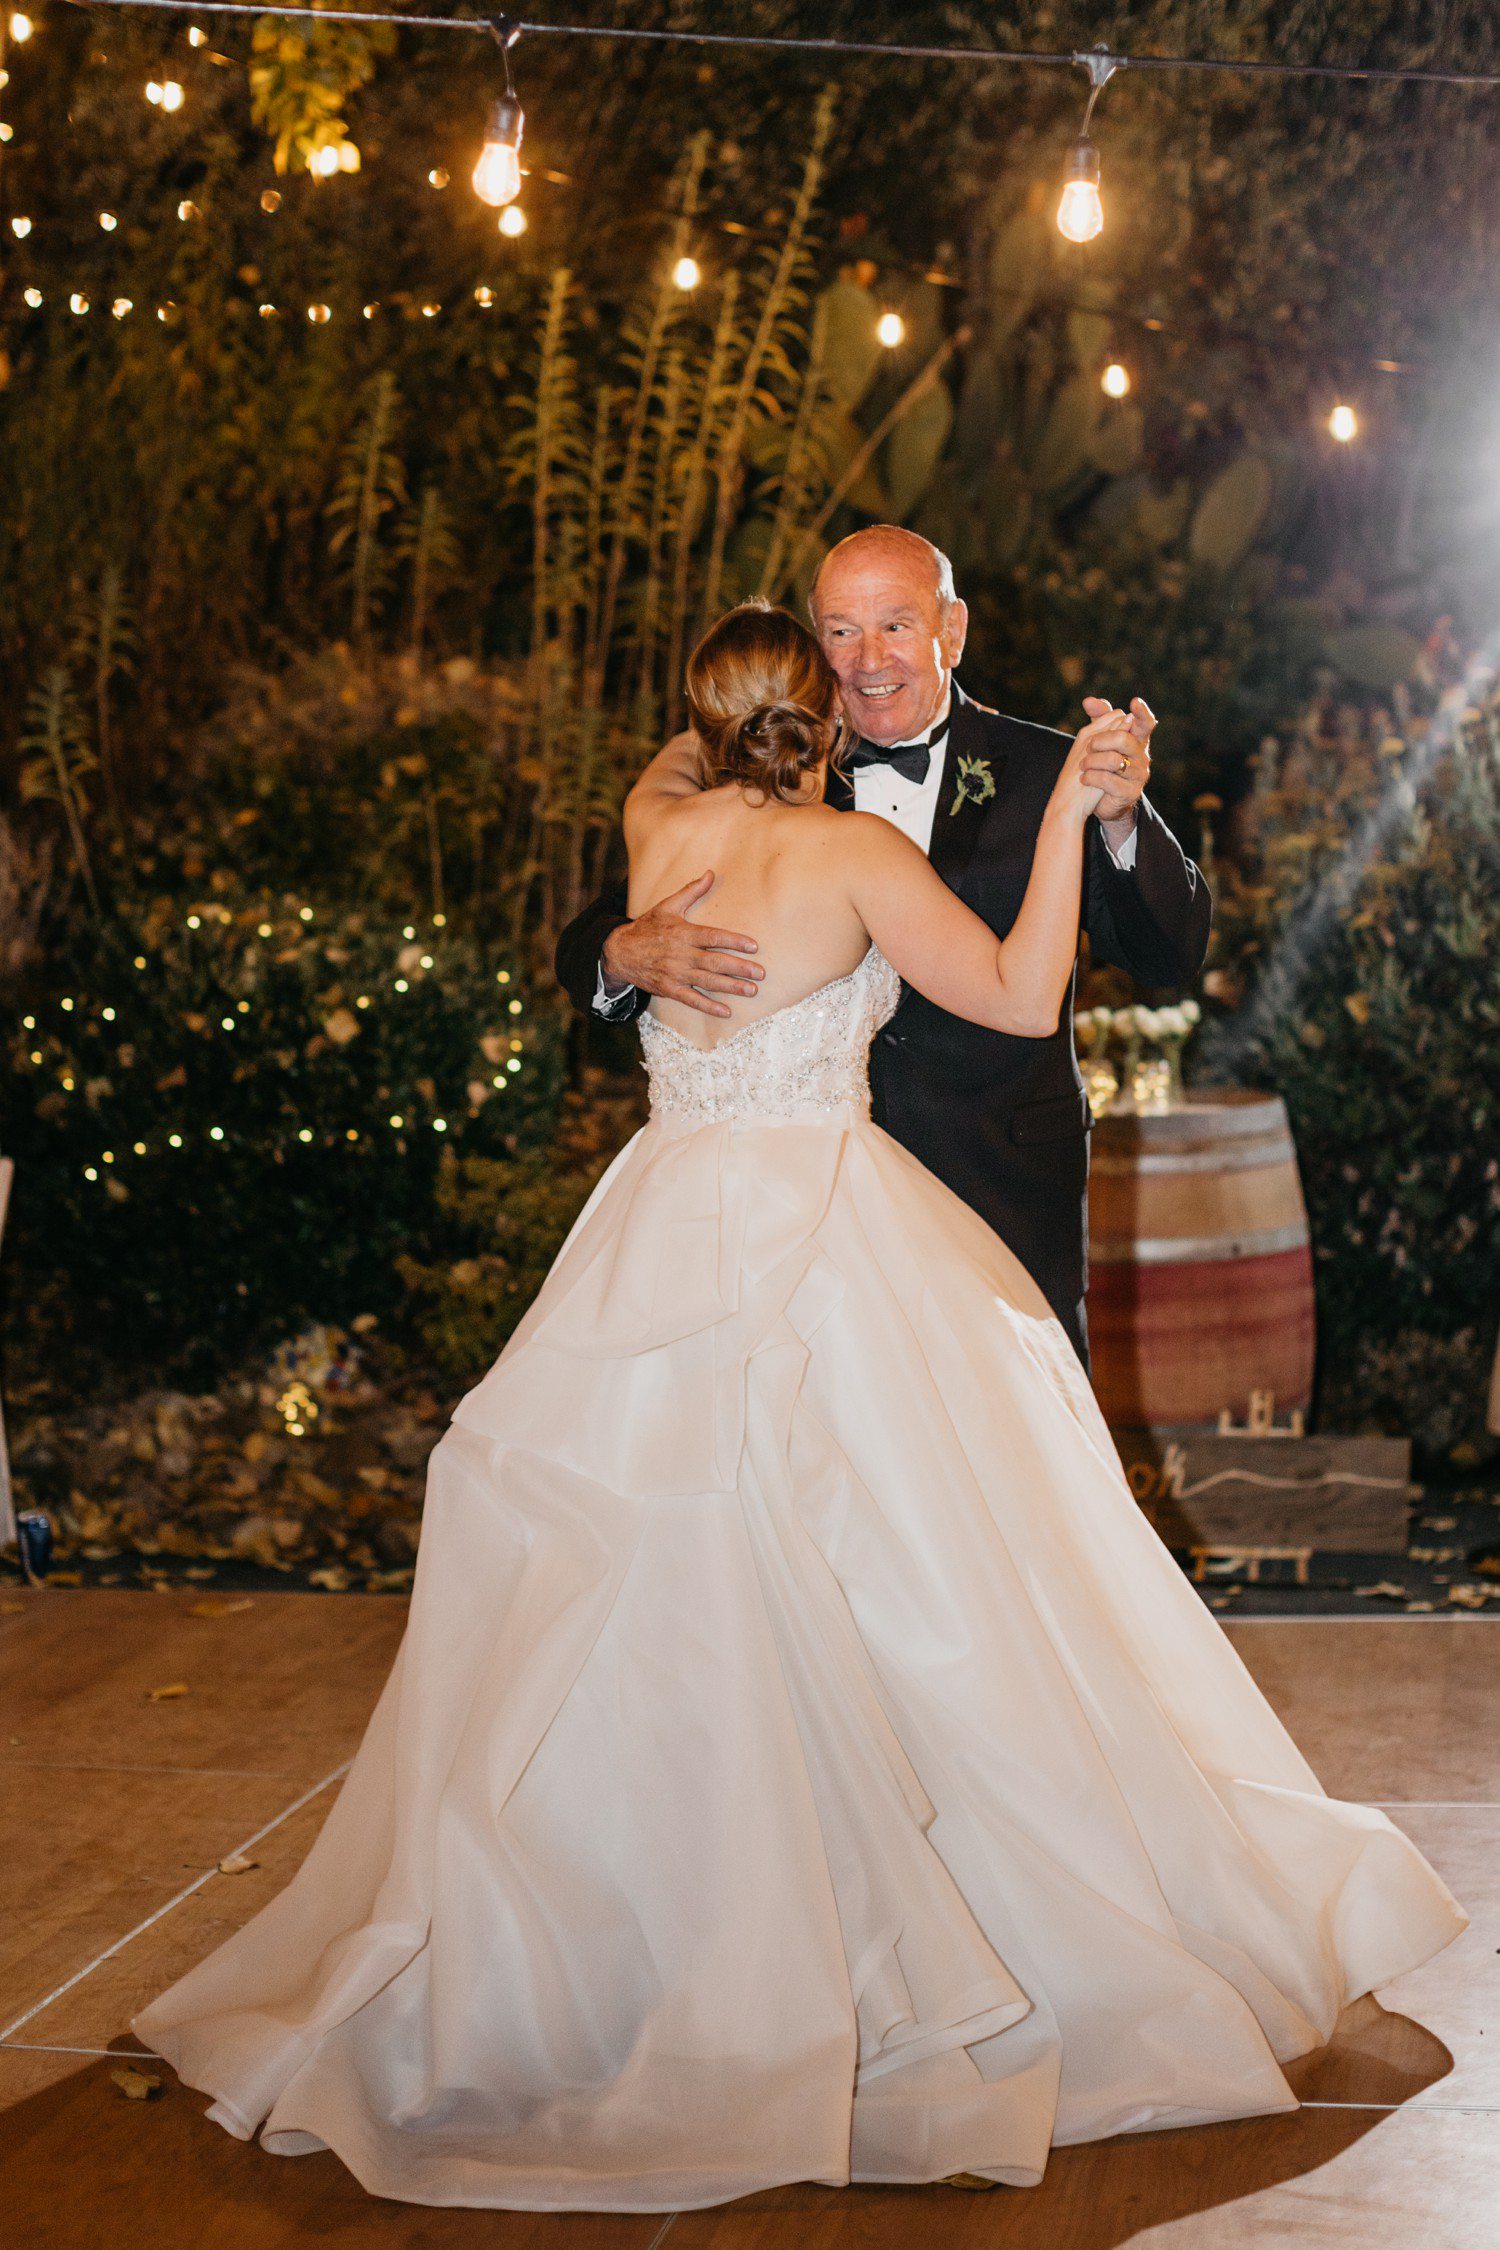 Bride and Father First Dance at Wedding Reception 